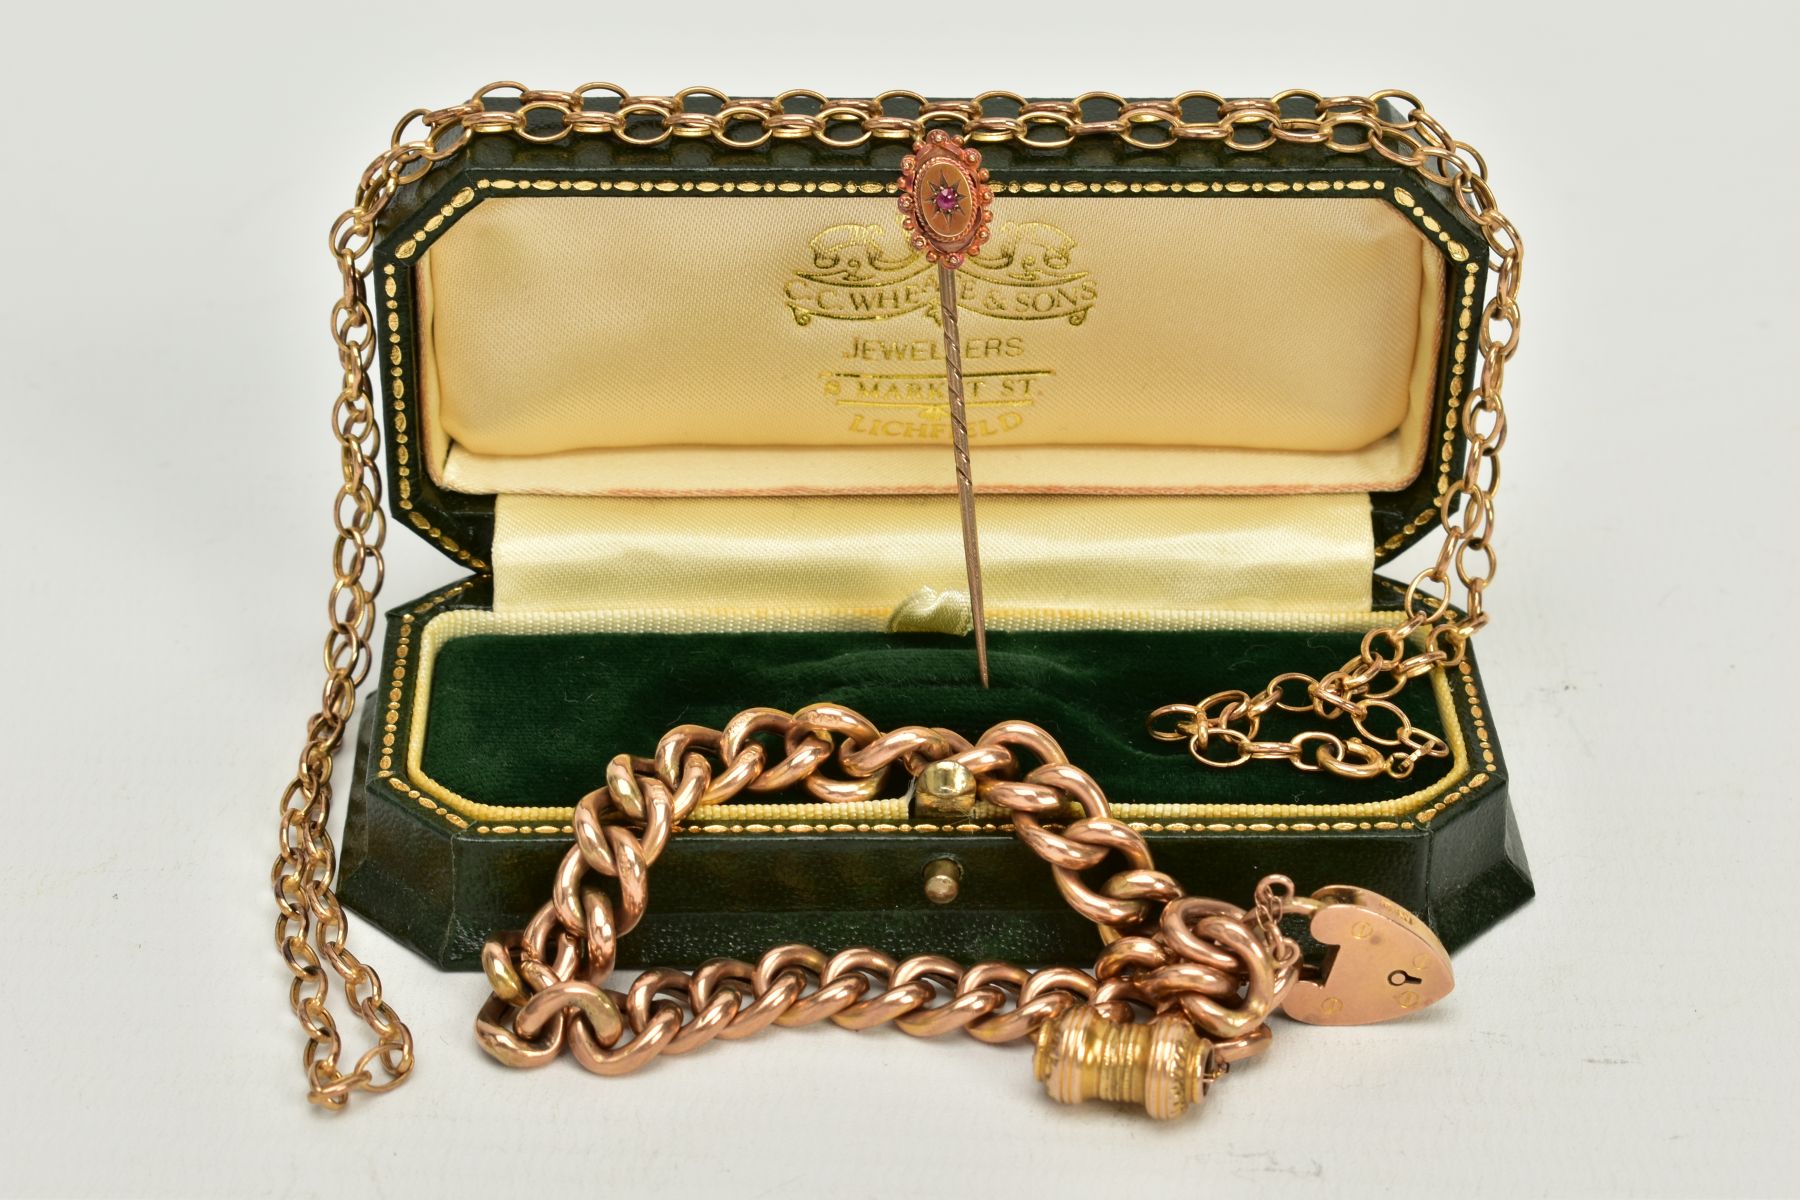 A 9CT GOLD CHARM BRACELET, A 9CT GOLD FINE BELCHER CHAIN AND A STICKPIN, an early 20th century charm